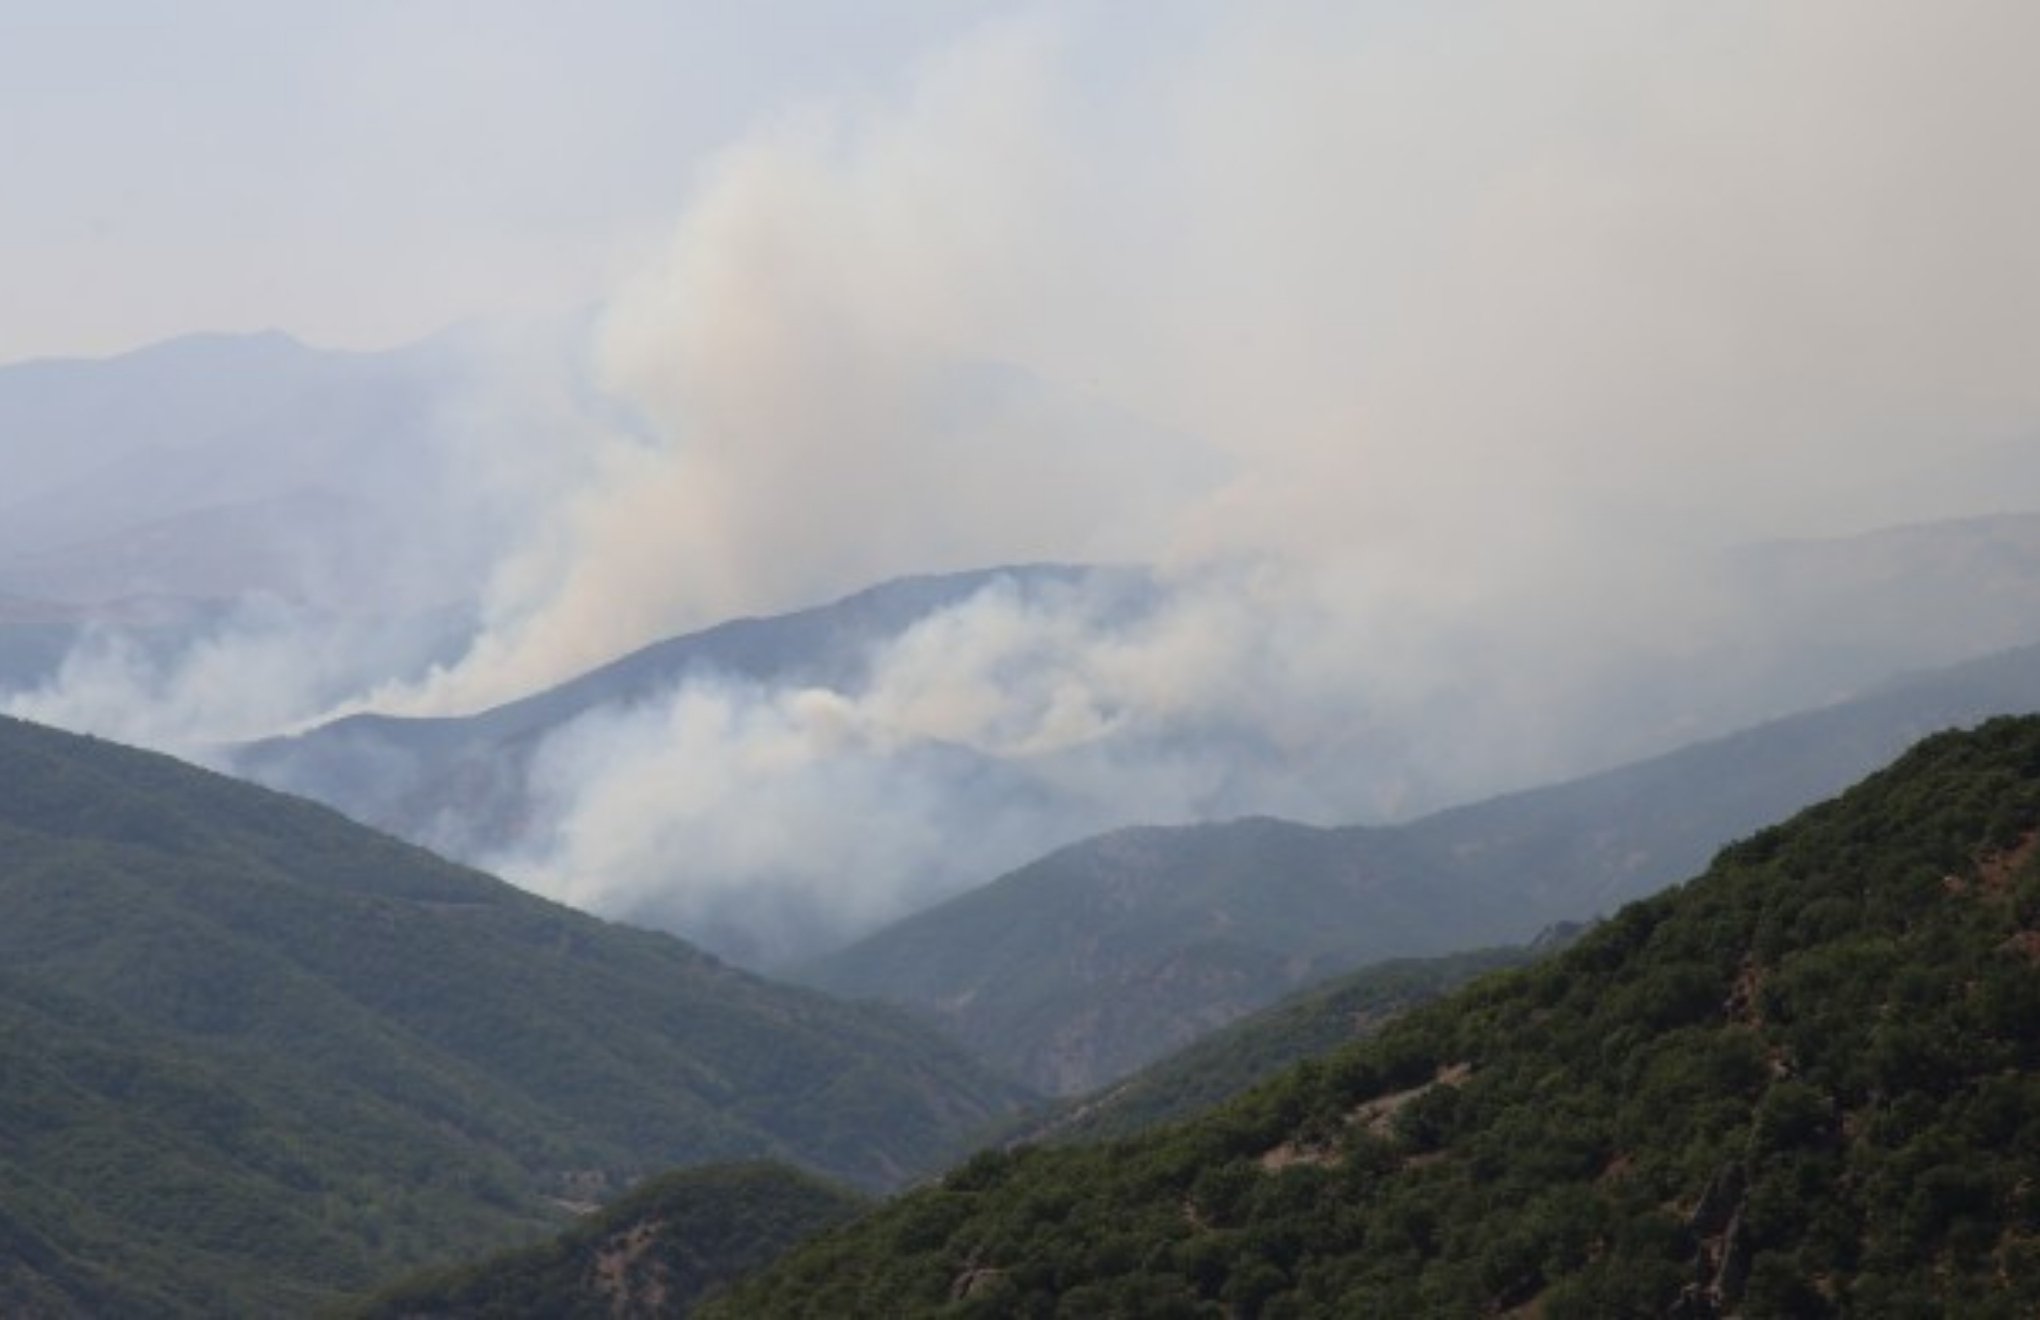 Government agencies not allowed to respond to wildfires in Dersim, says mayor